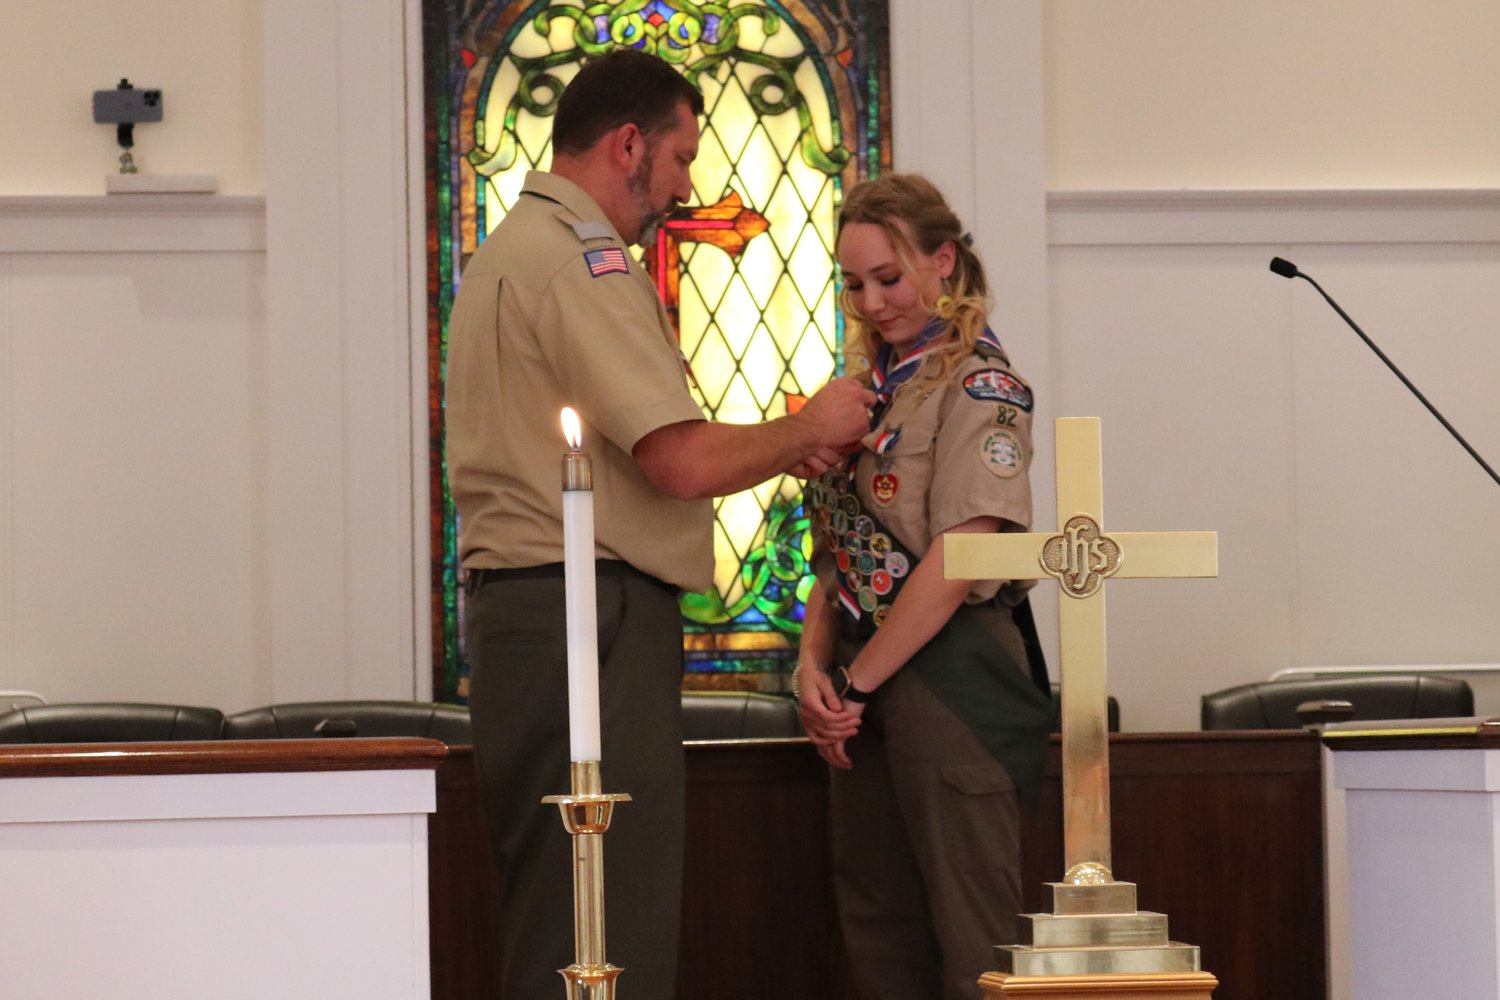 New Eagle Scout Dorothy Myers is presented her first two Eagle Palms by her father, John. Eagle Palms are awarded to those who earn five, 10, 15 or more merit badges beyond the 21 required to become an Eagle Scout.